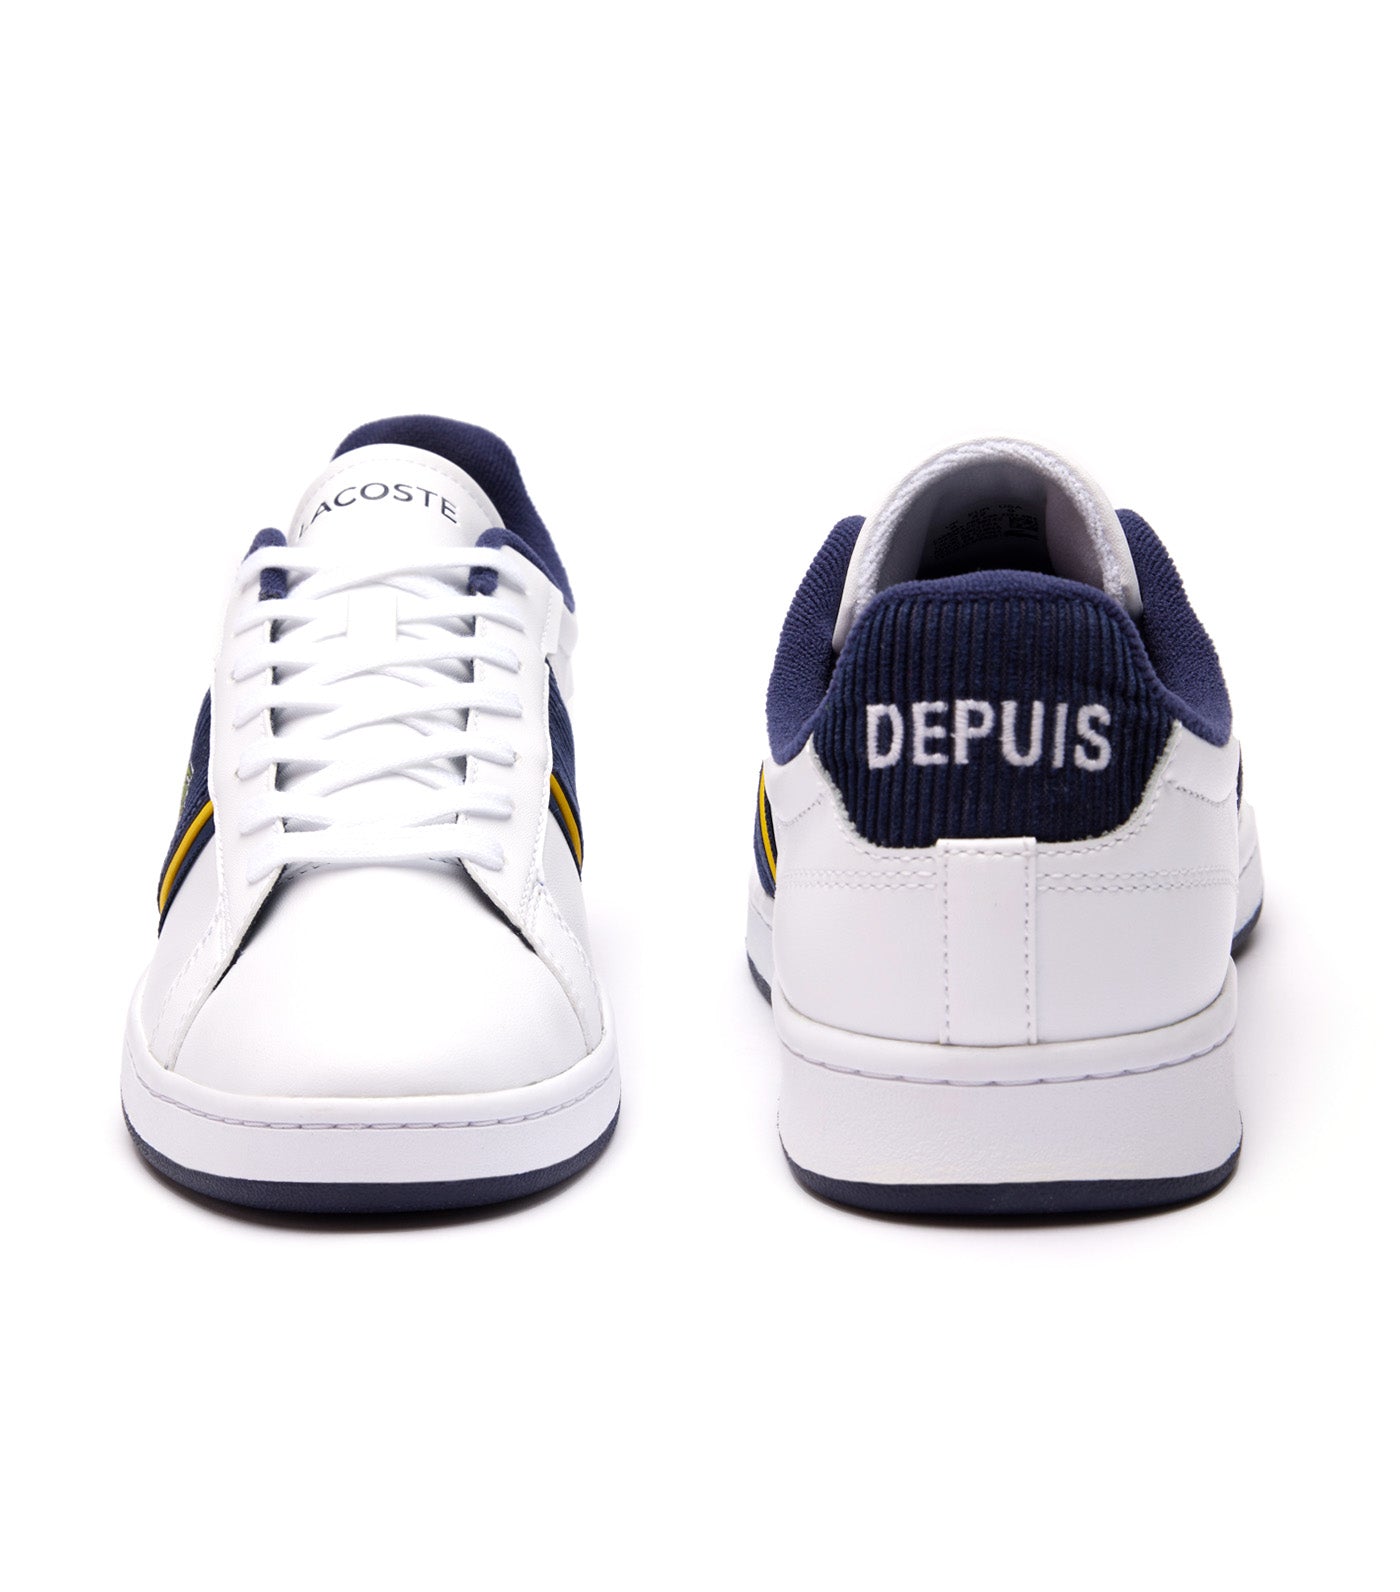 Men's Carnaby Pro CGR Bar Corduroy Detail Trainers White/Navy